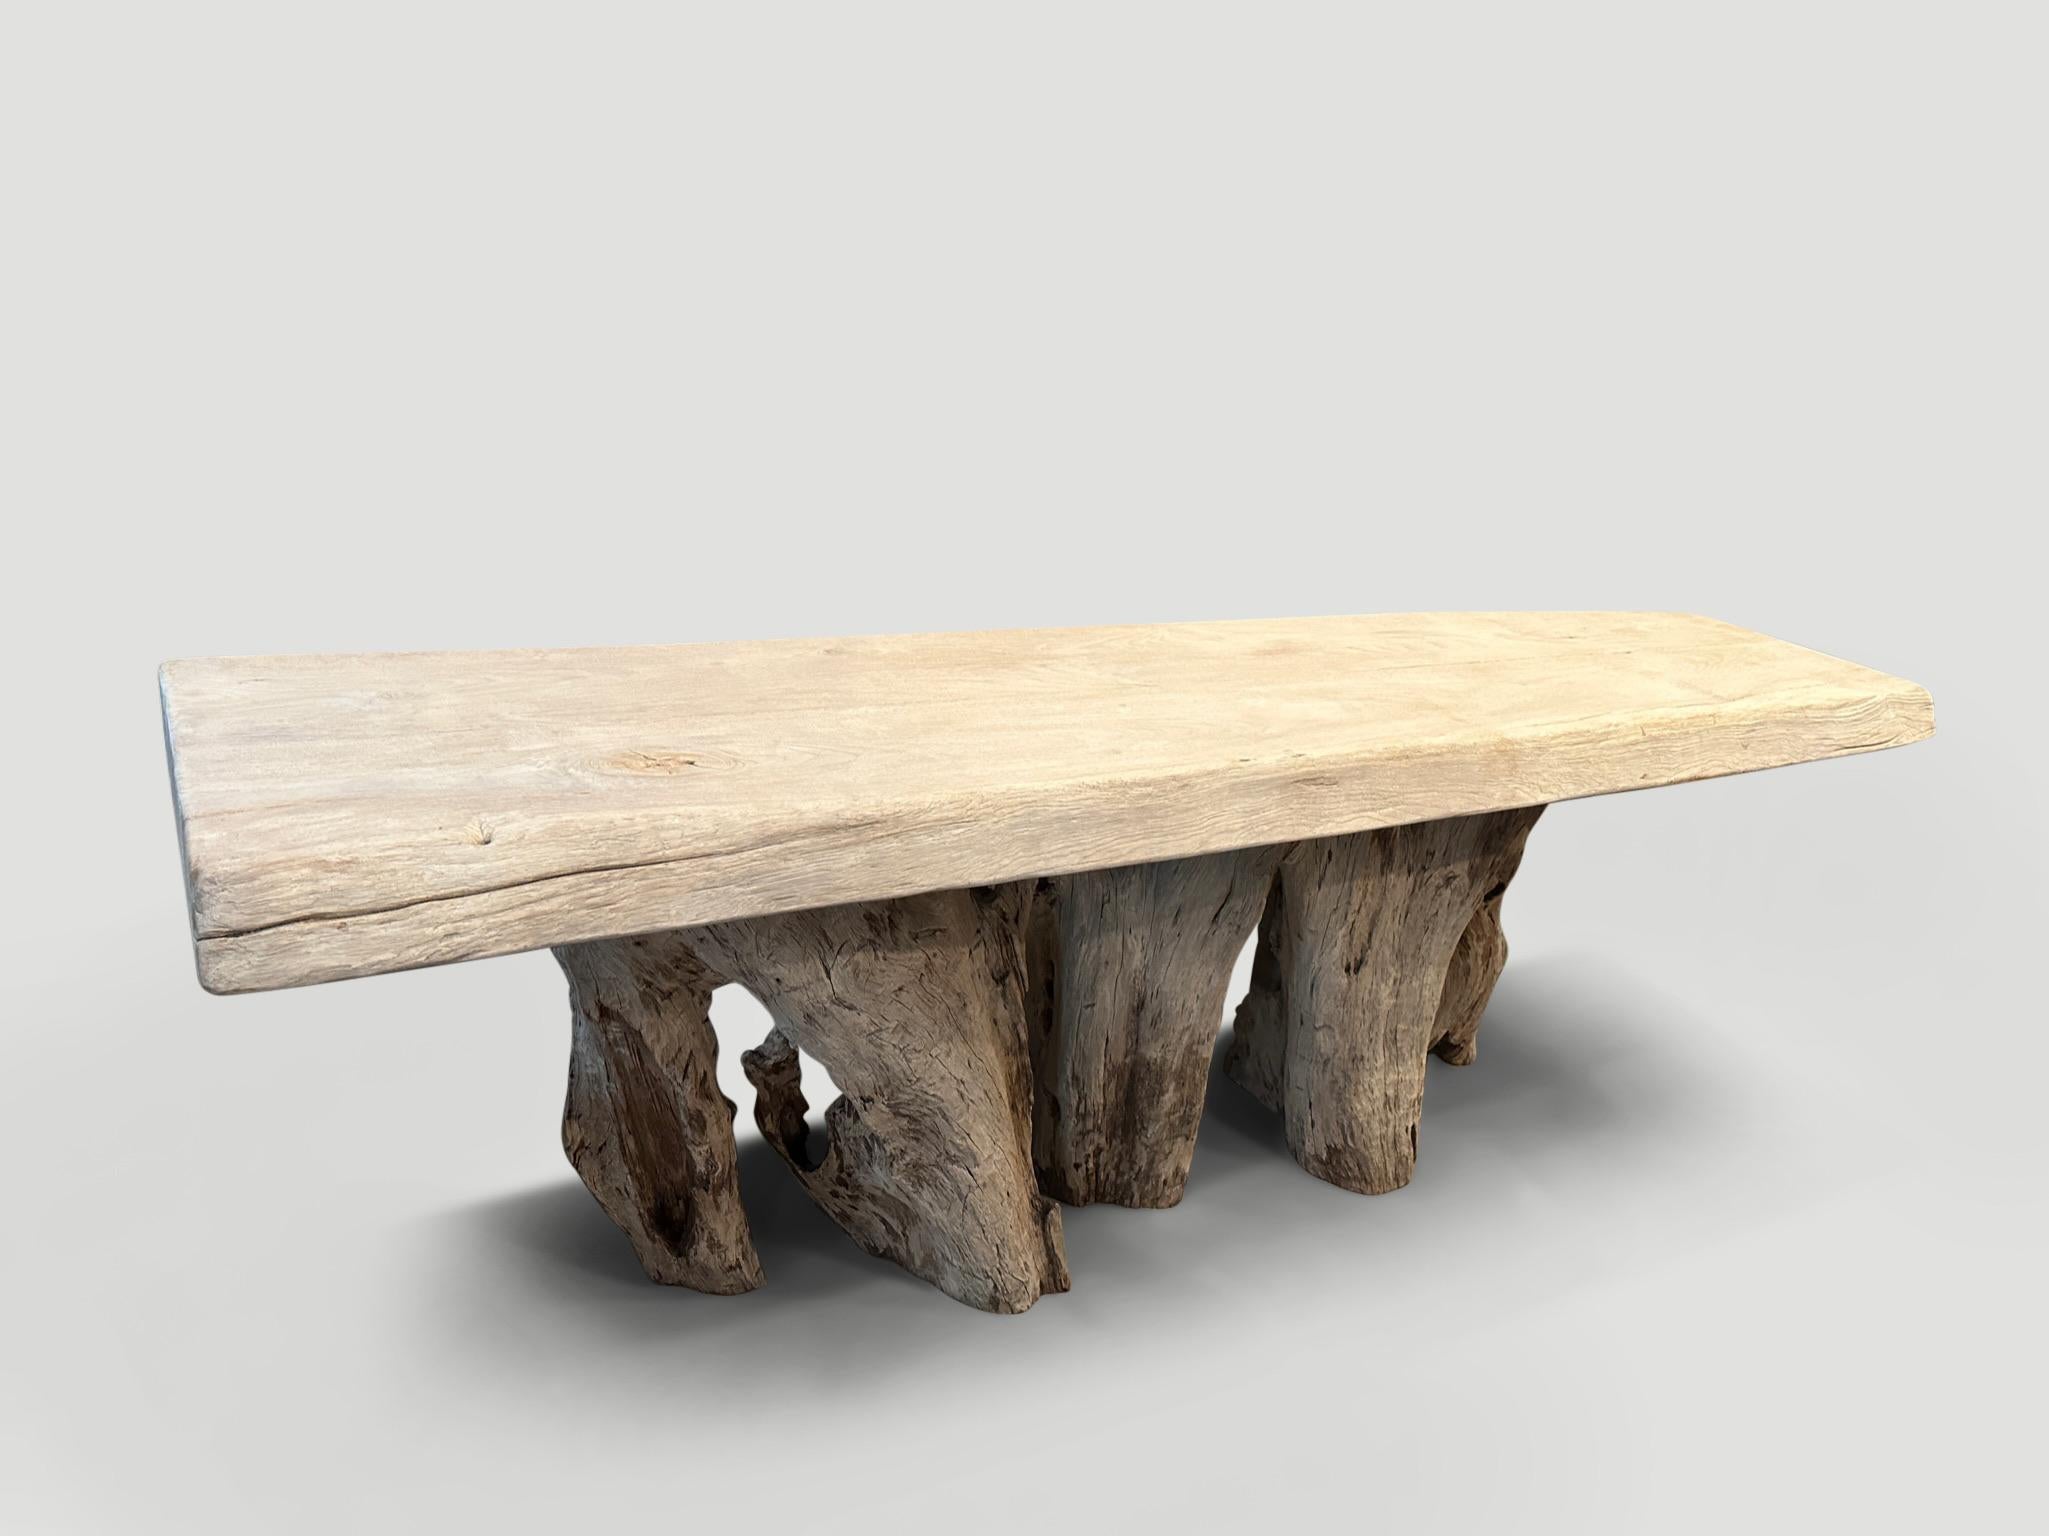 Reclaimed Wood Andrianna Shamaris Monumental Organic Teak Root Console Table  For Sale